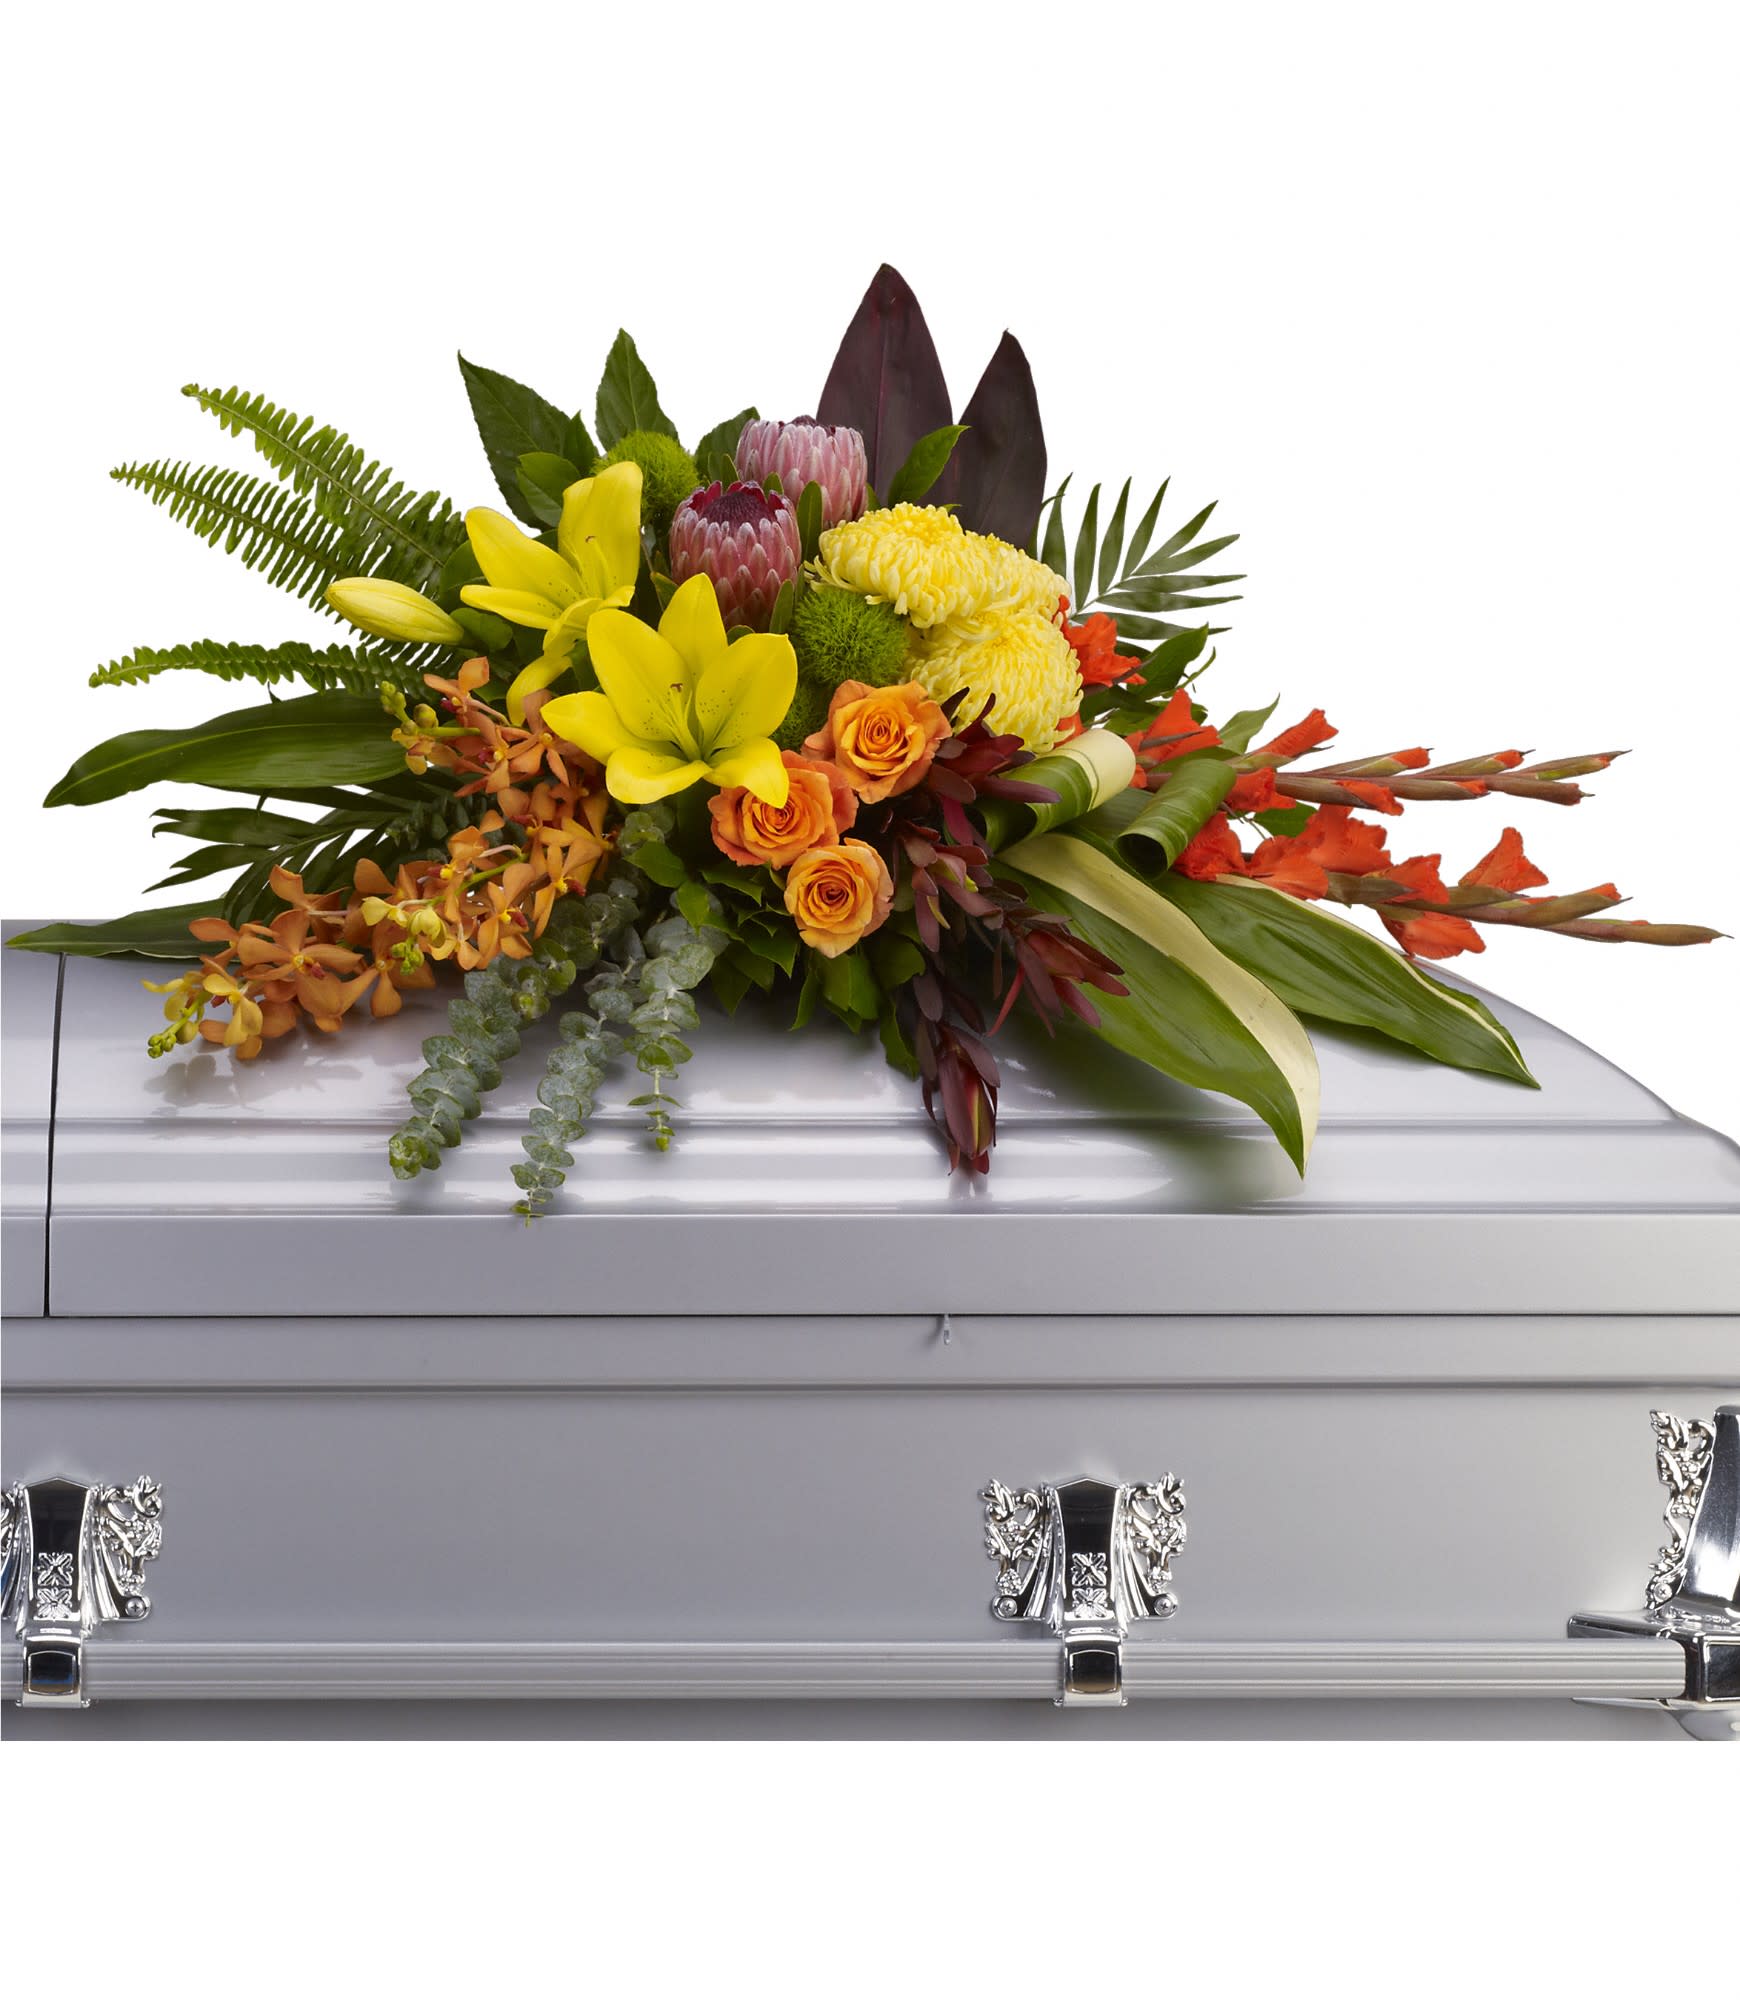 Island Memories Casket Spray - Graceful and fresh, this tropical-influenced spray sheds light on memories that will be forever treasured. Splashed with color and grounded with earth tones, it lends comfort and hope to any memorial. 